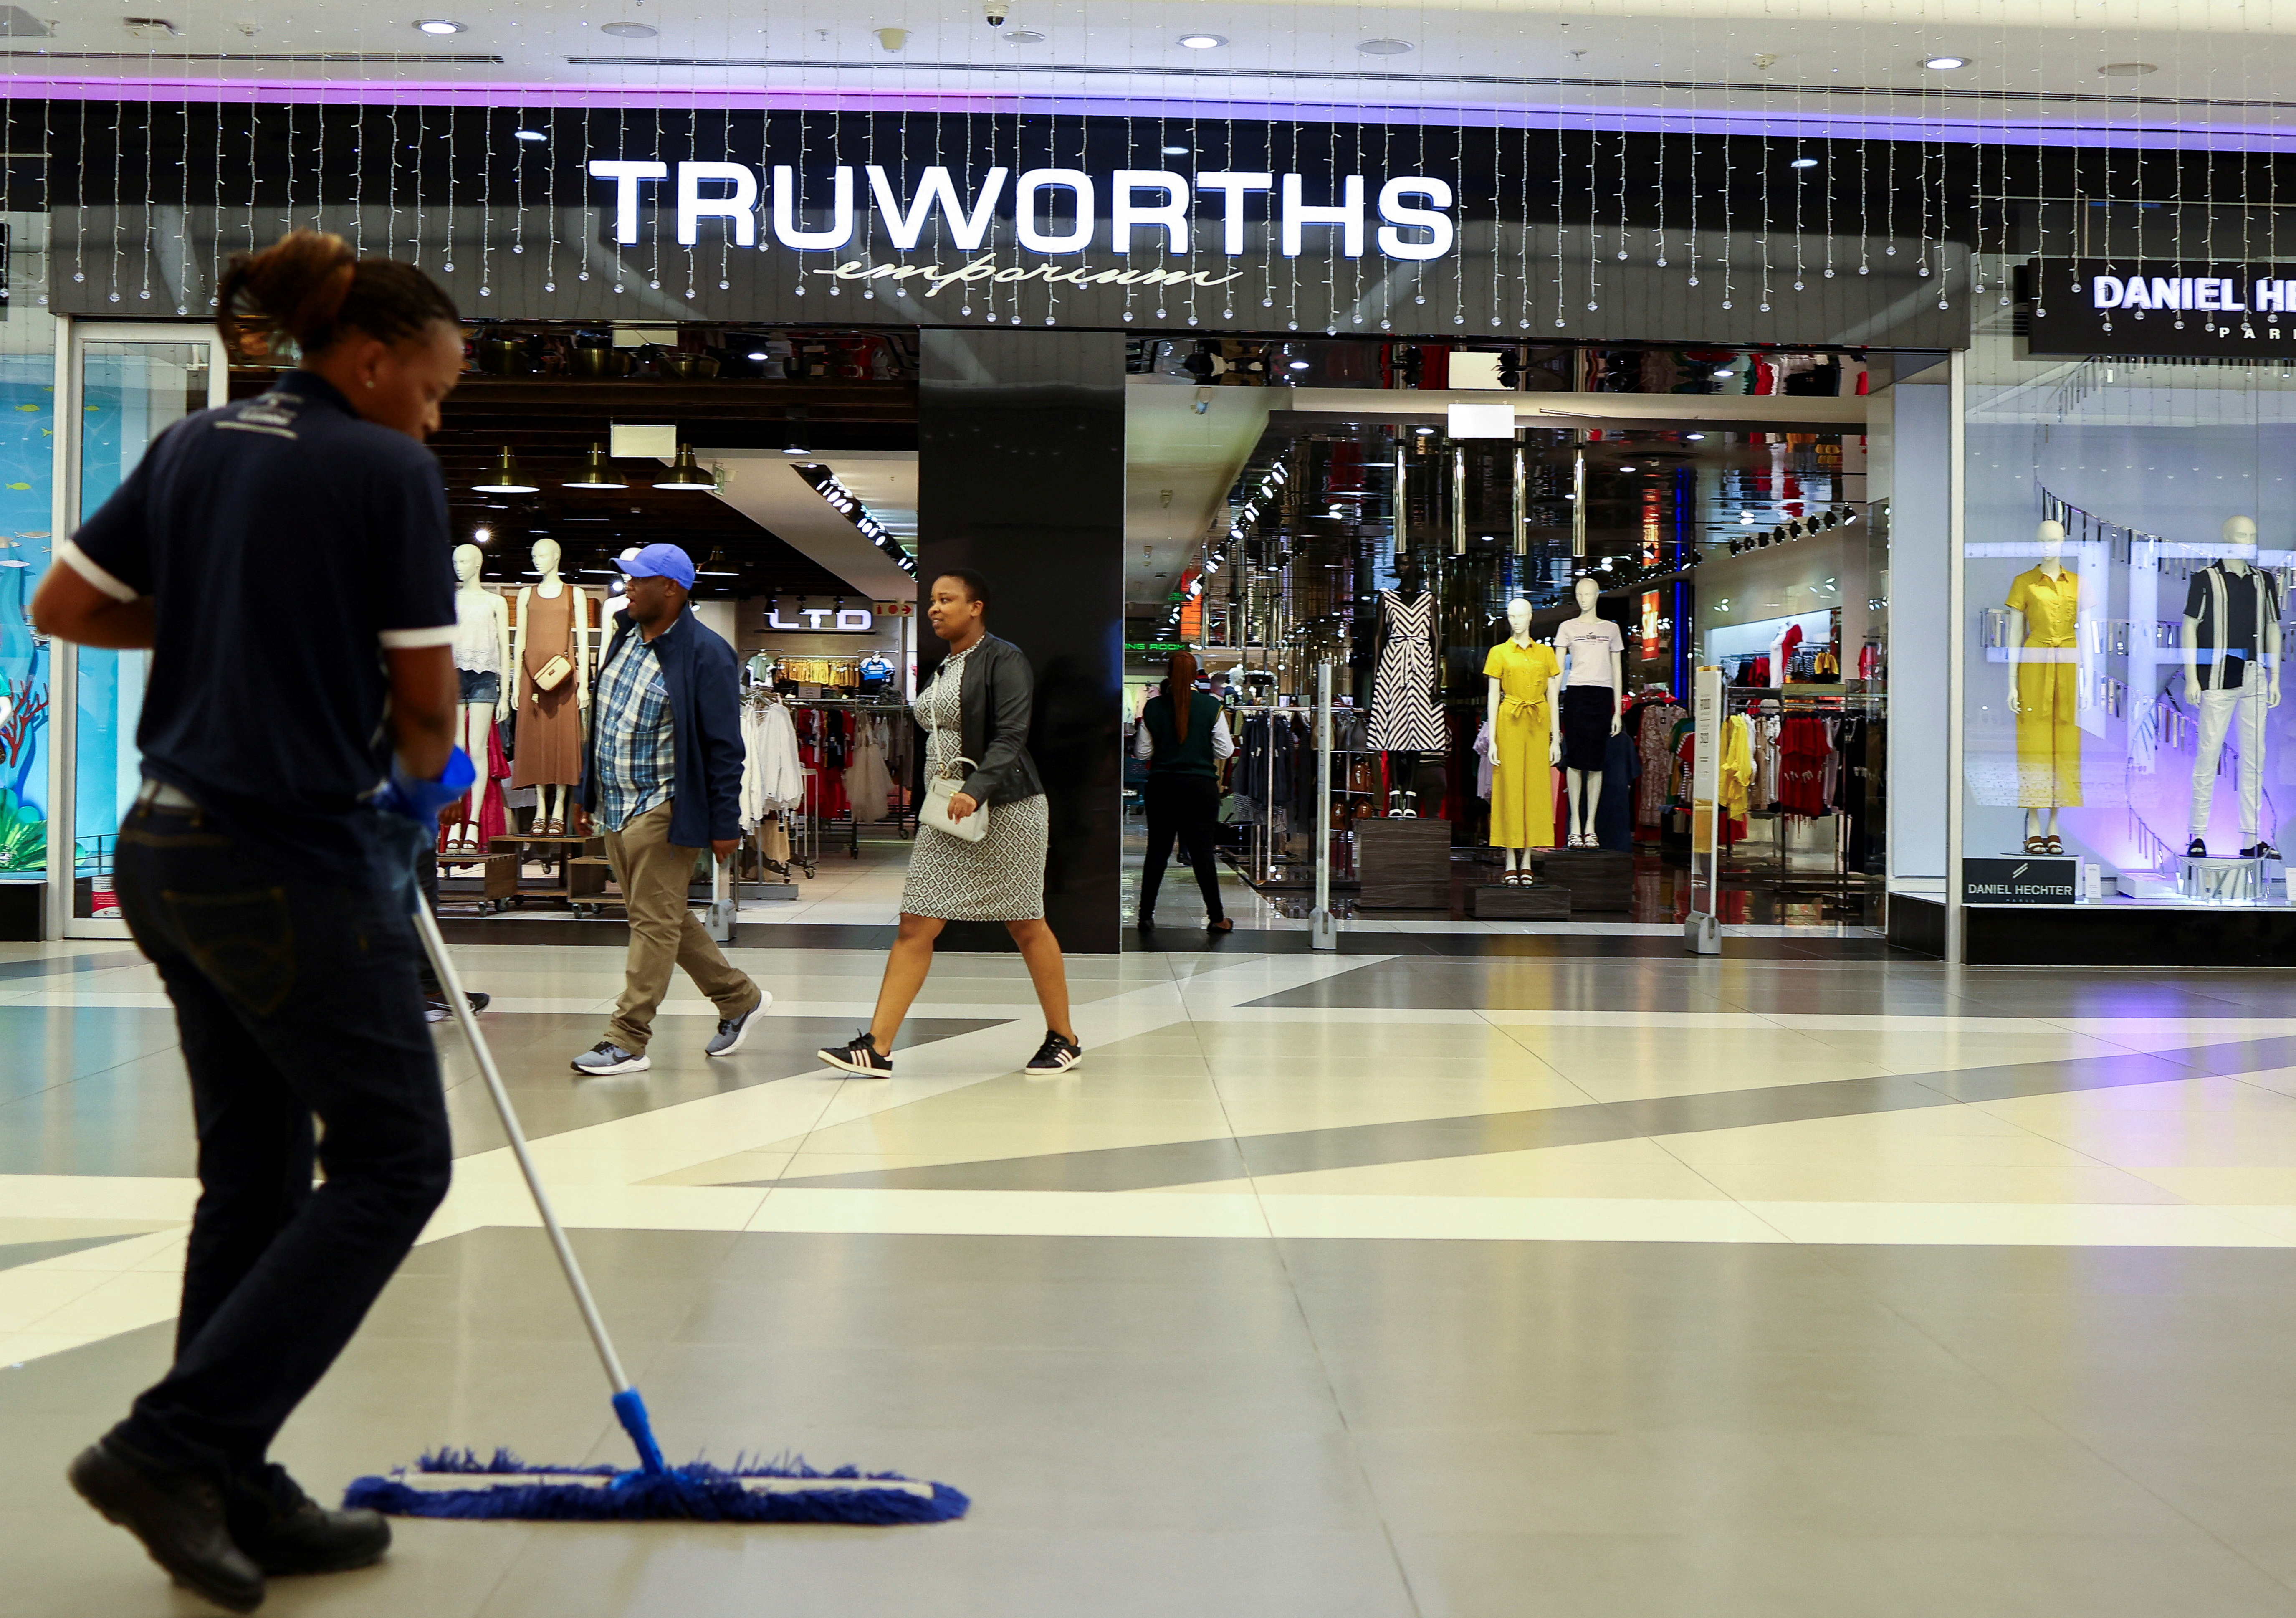 A worker cleans in front of a Truworths shop, in Johannesburg